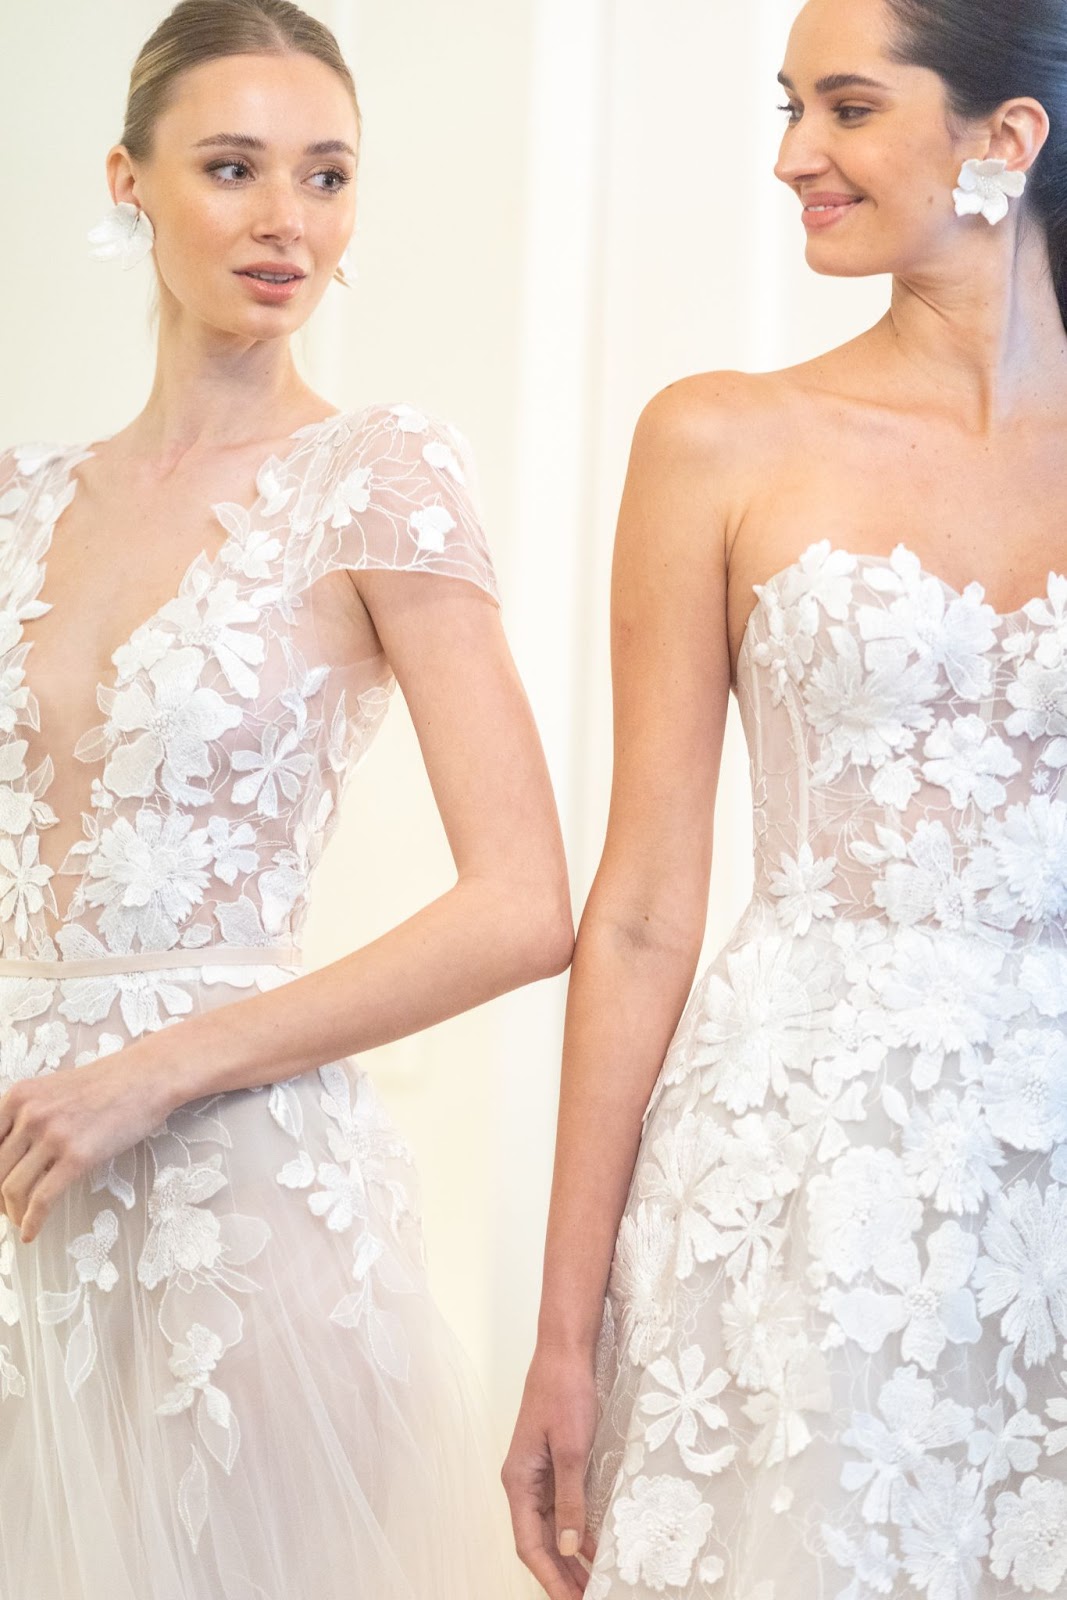 Stunning florals on these wedding gowns.